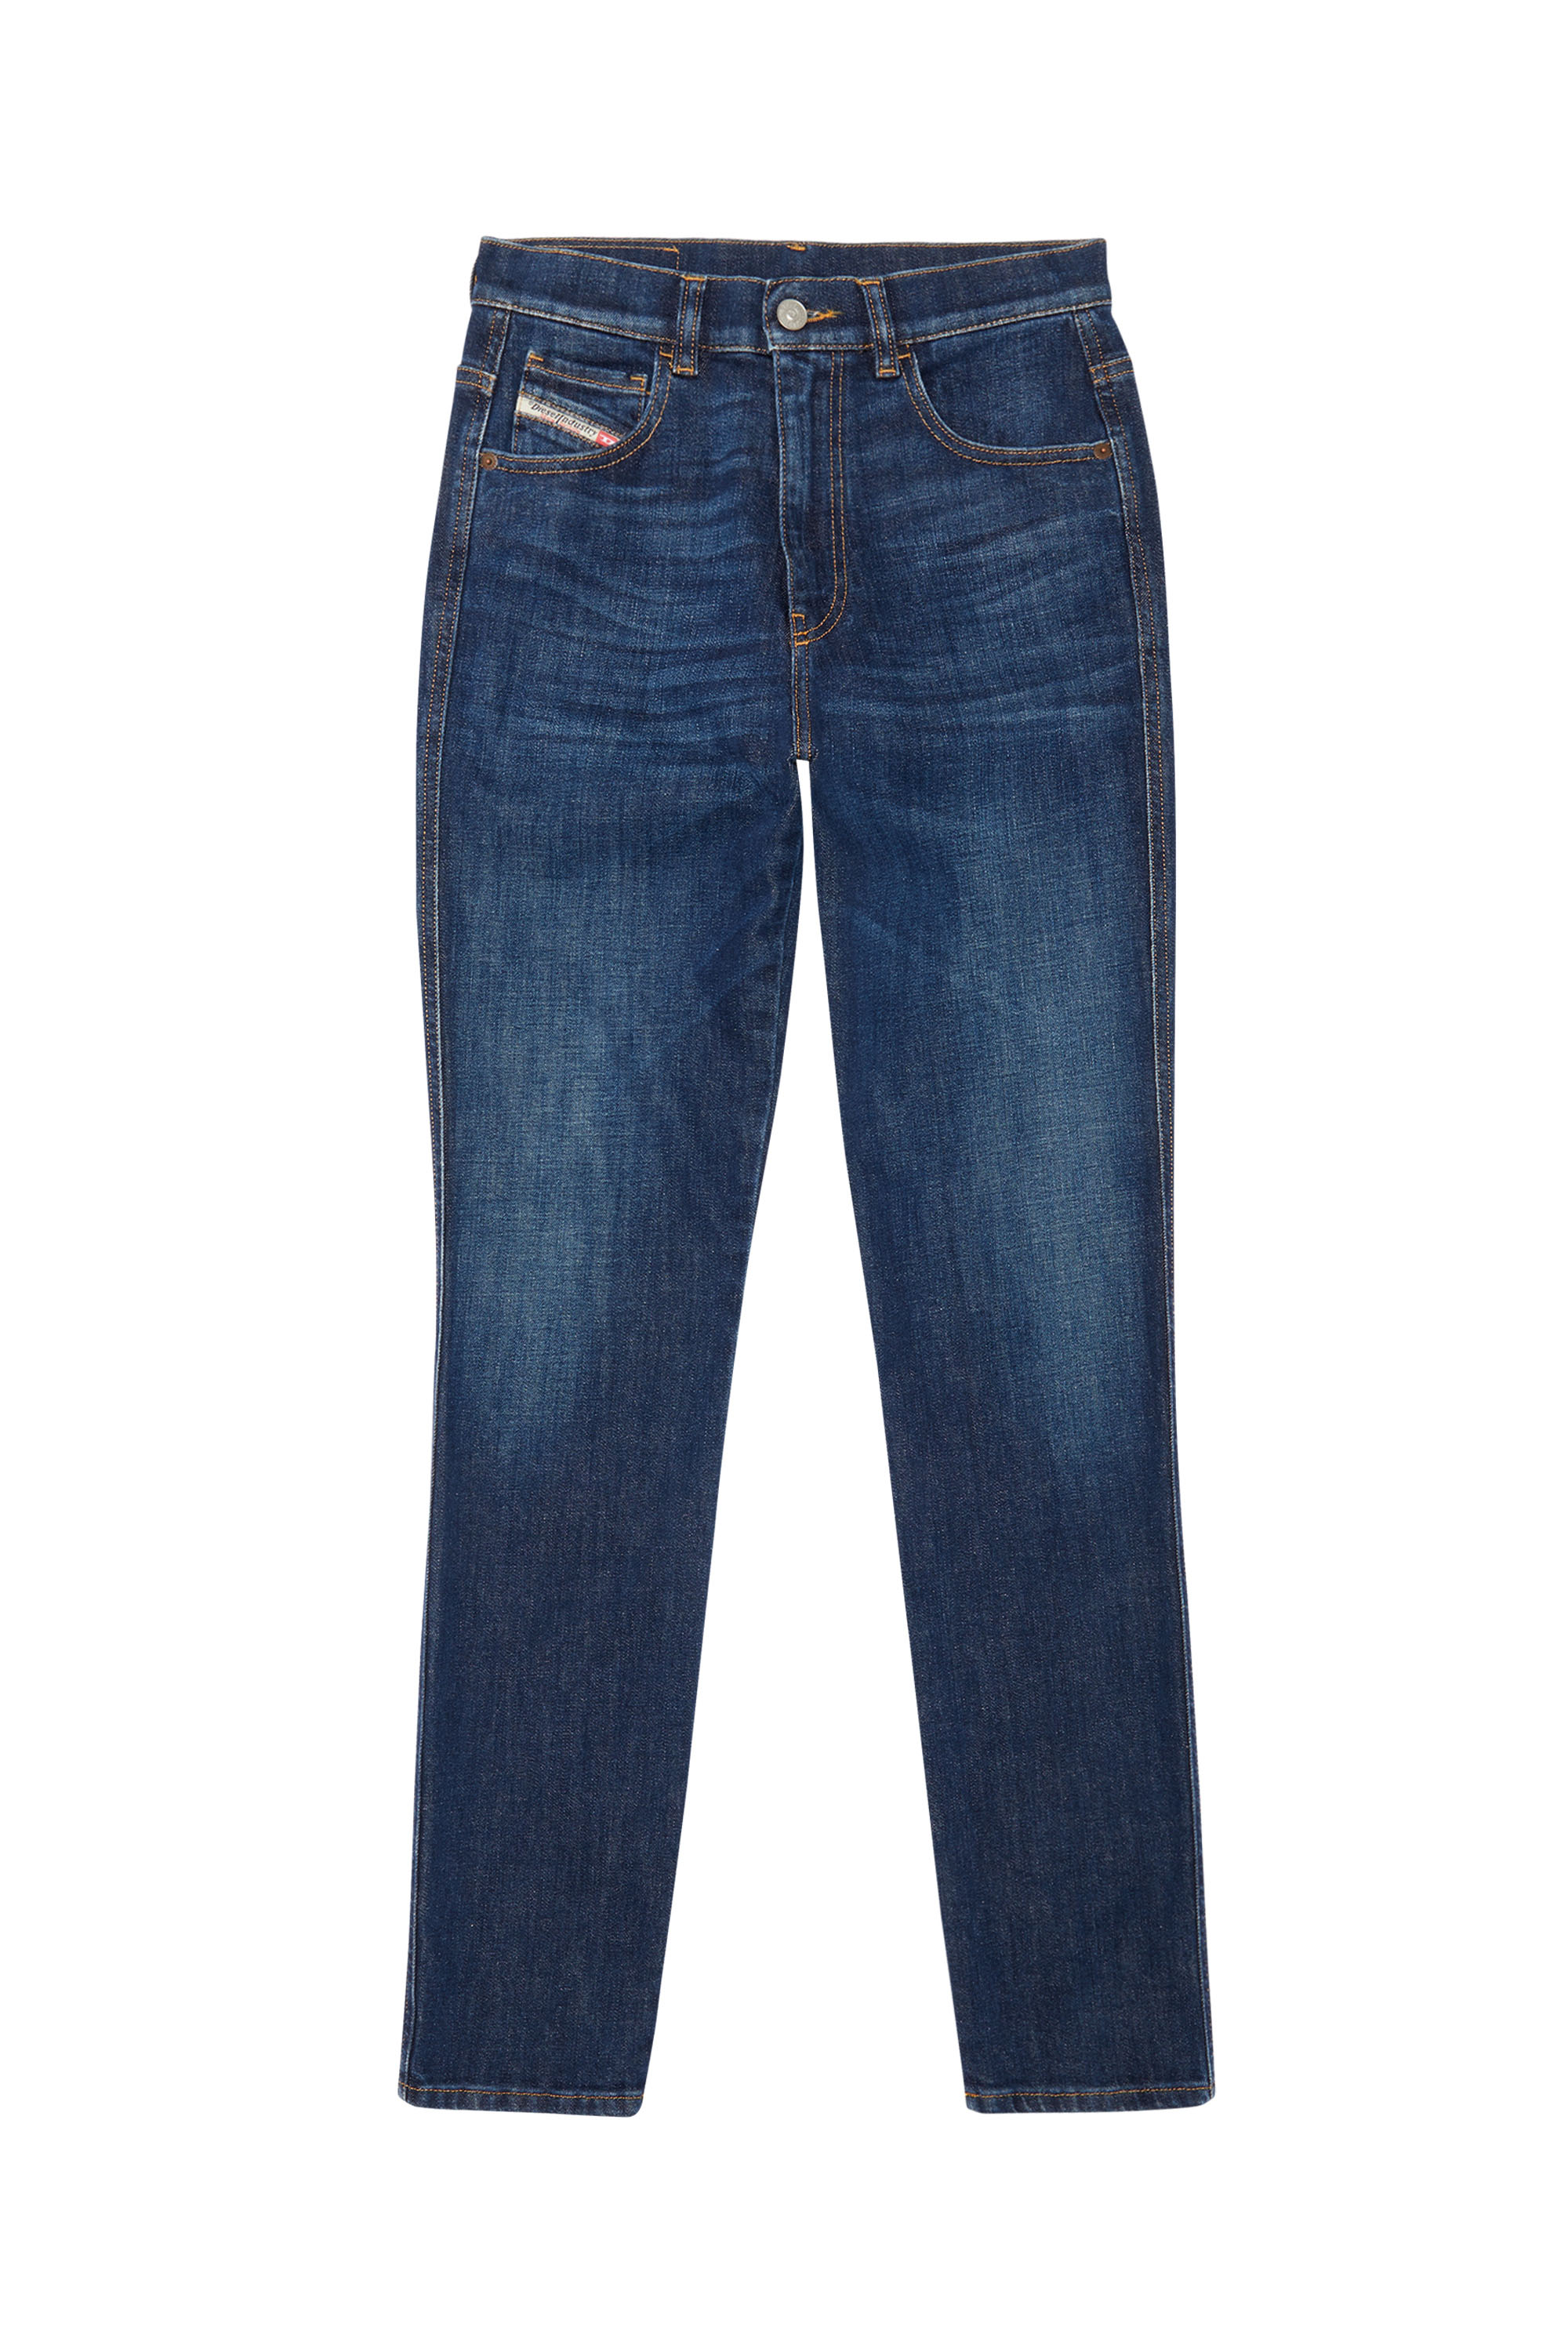 1994 09B90 Straight Jeans, Blu Scuro - Jeans